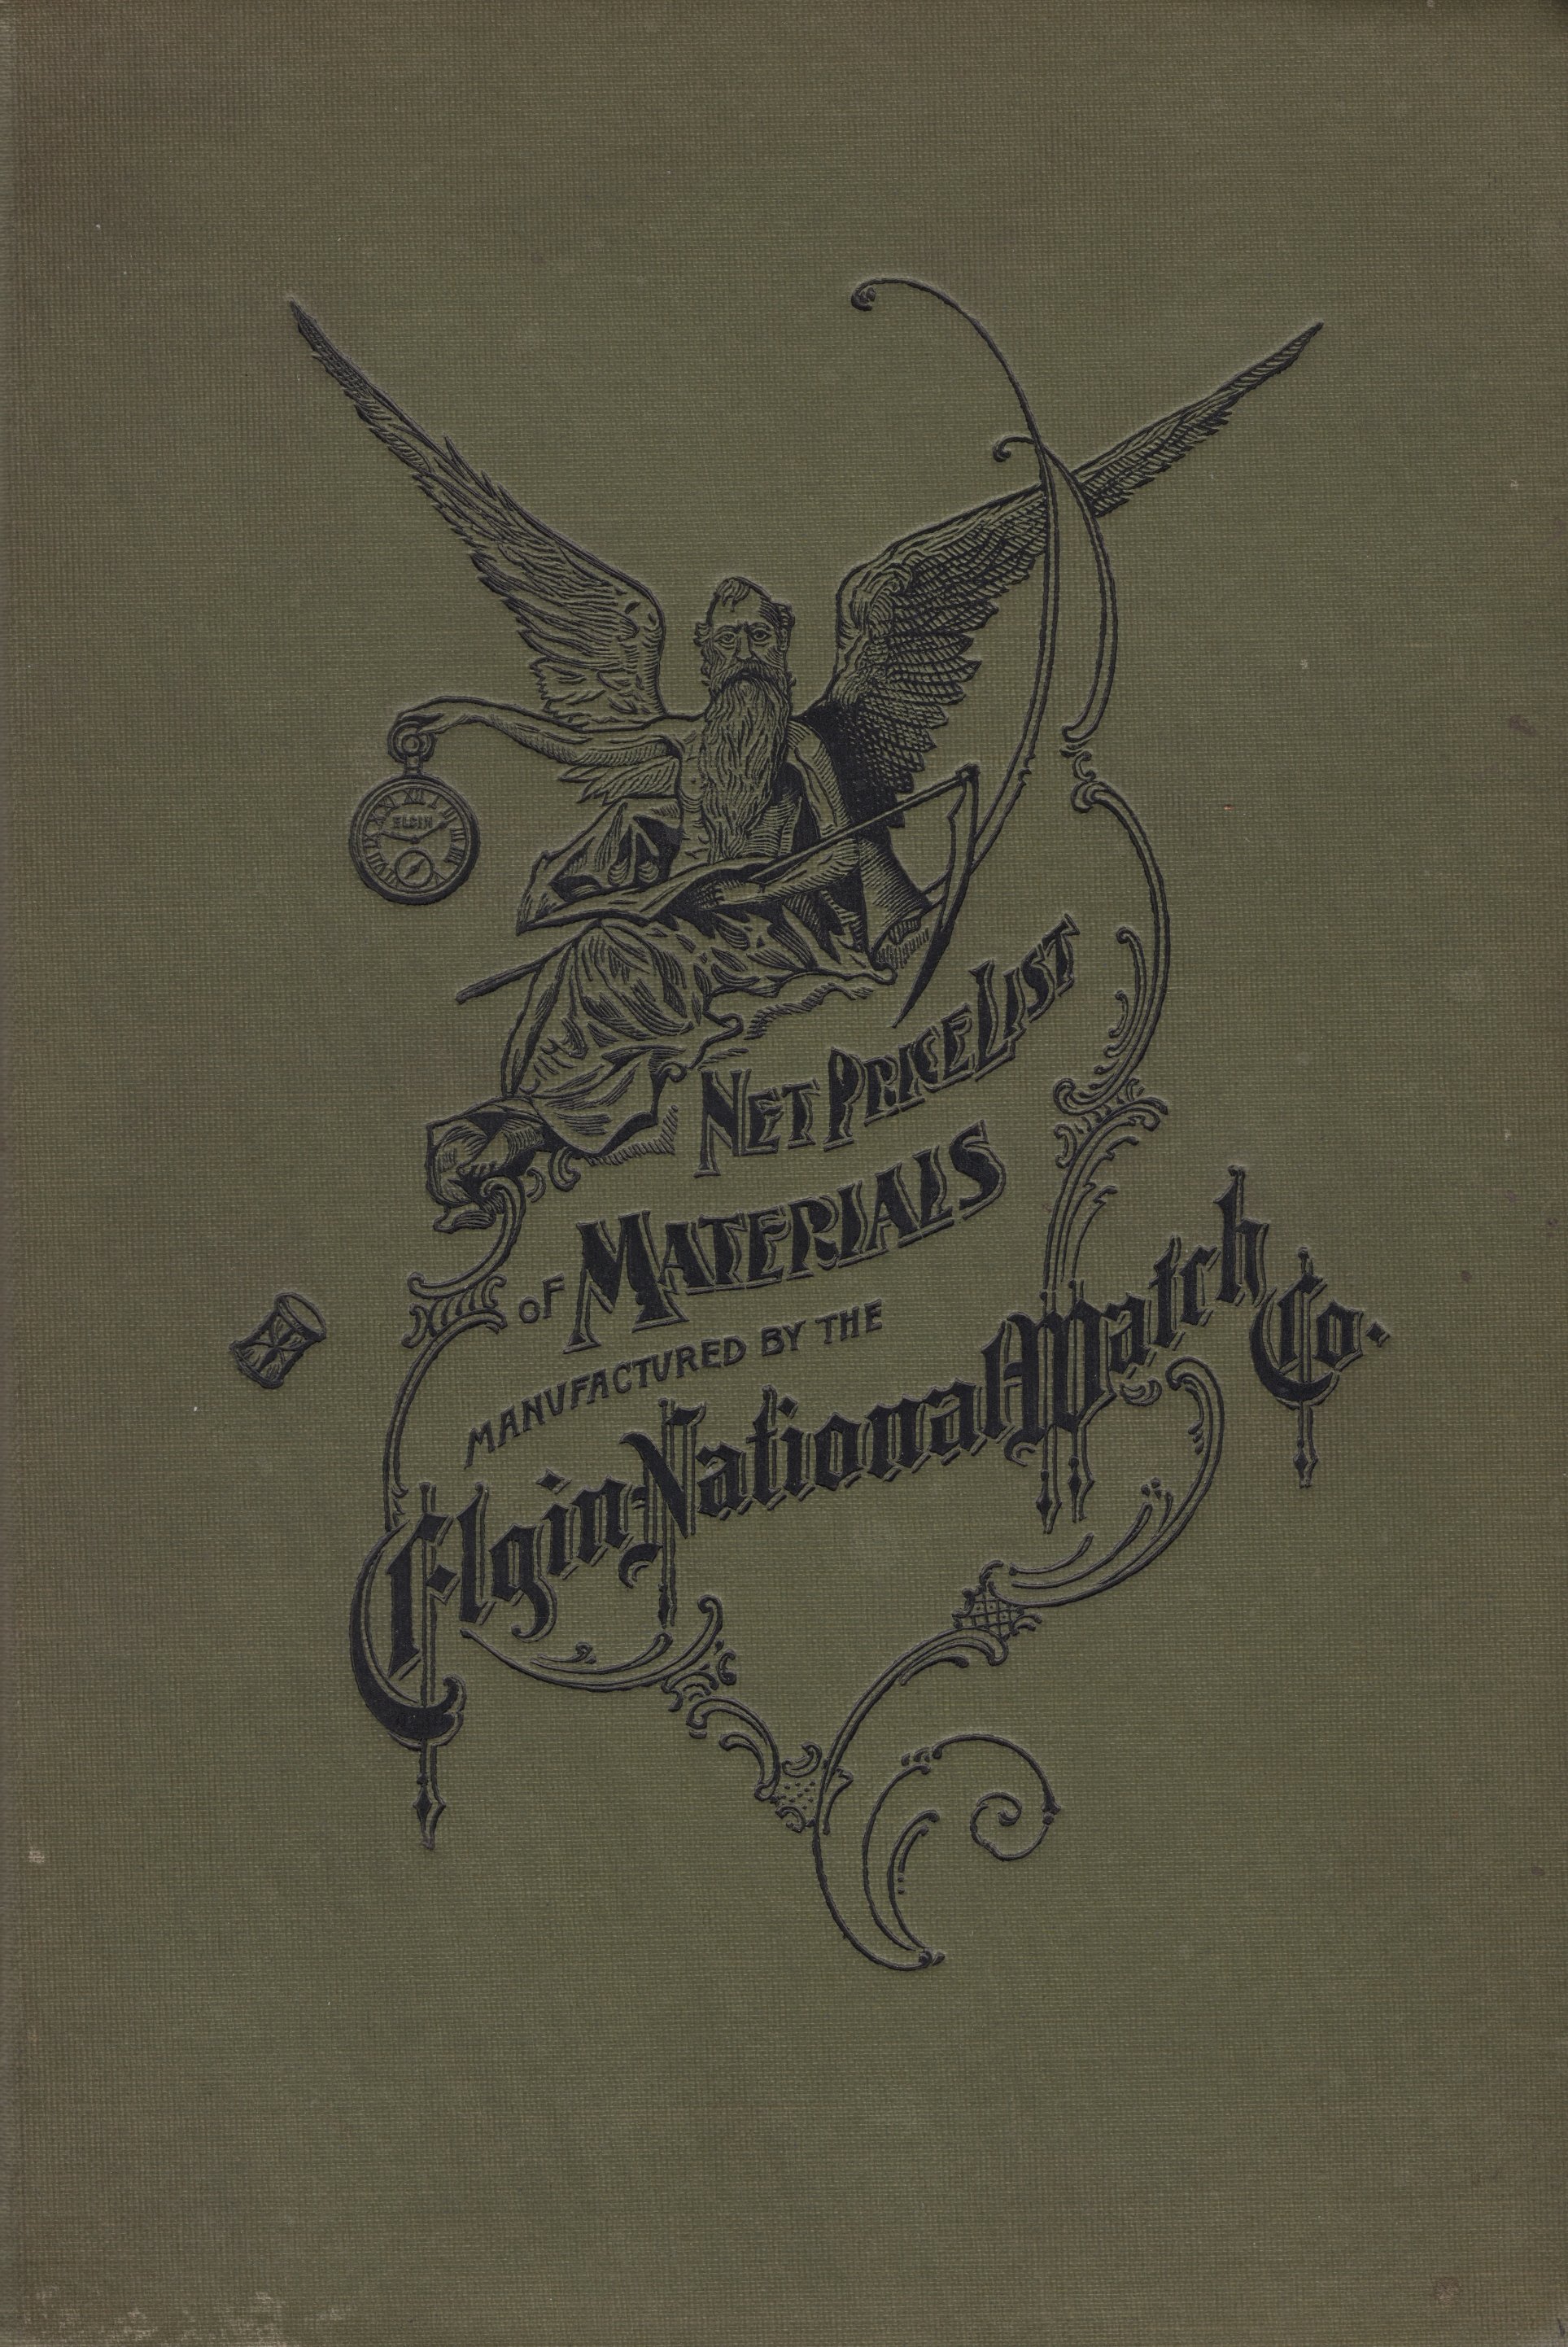 Net Price List of Materials Manufactured by the Elgin National Watch Co. (1904) Cover Image